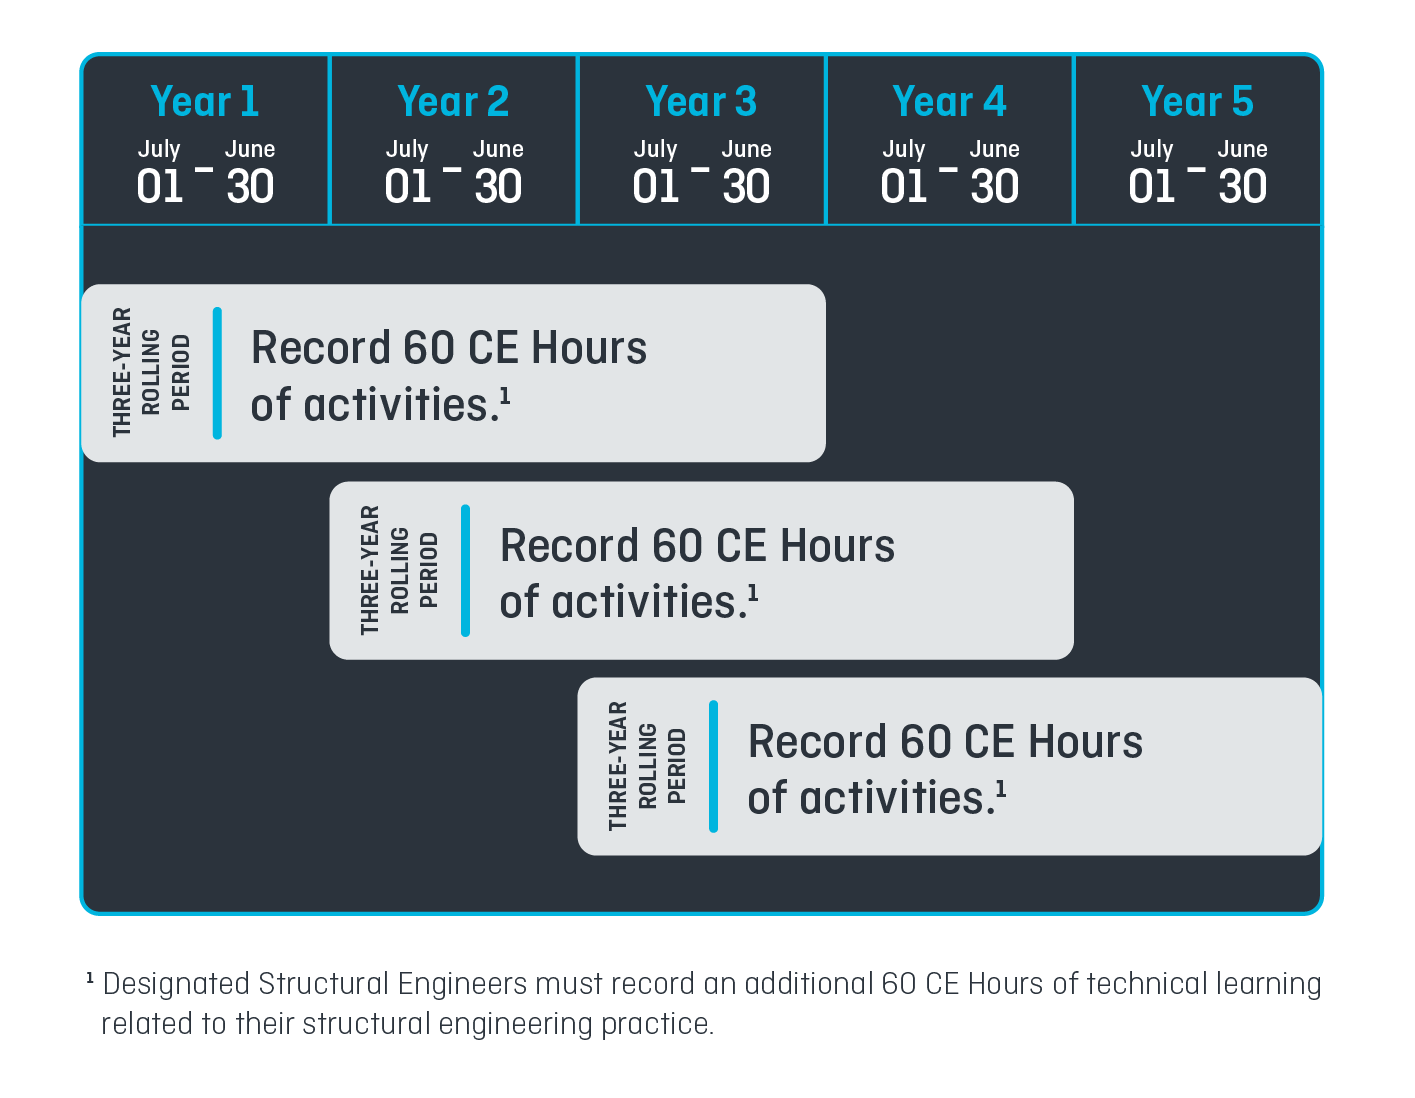 By the end of each three-year rolling period, registrants must record at least 60 CE Hours of activities (20 hours per year on average) in their CE Reporting System.